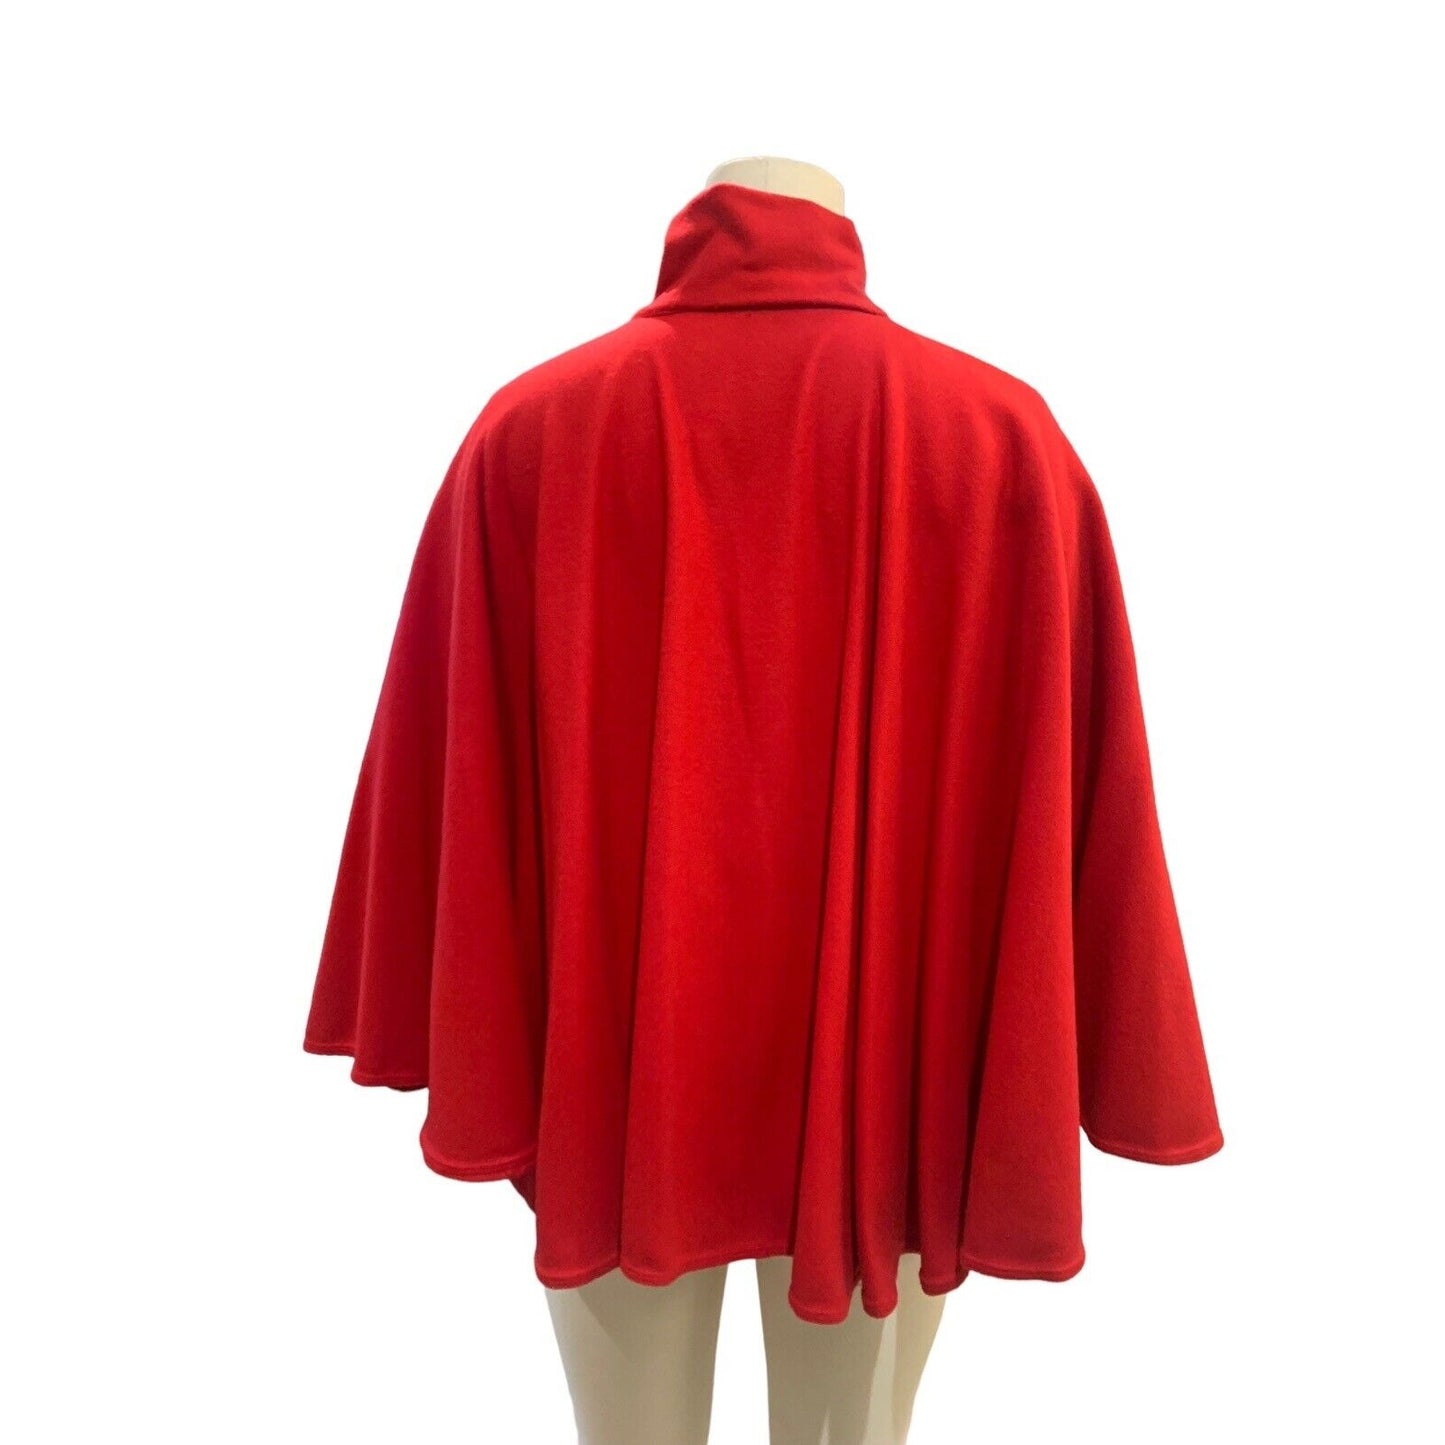 Back View Of Red High-Collar 3/4 Zip Cape